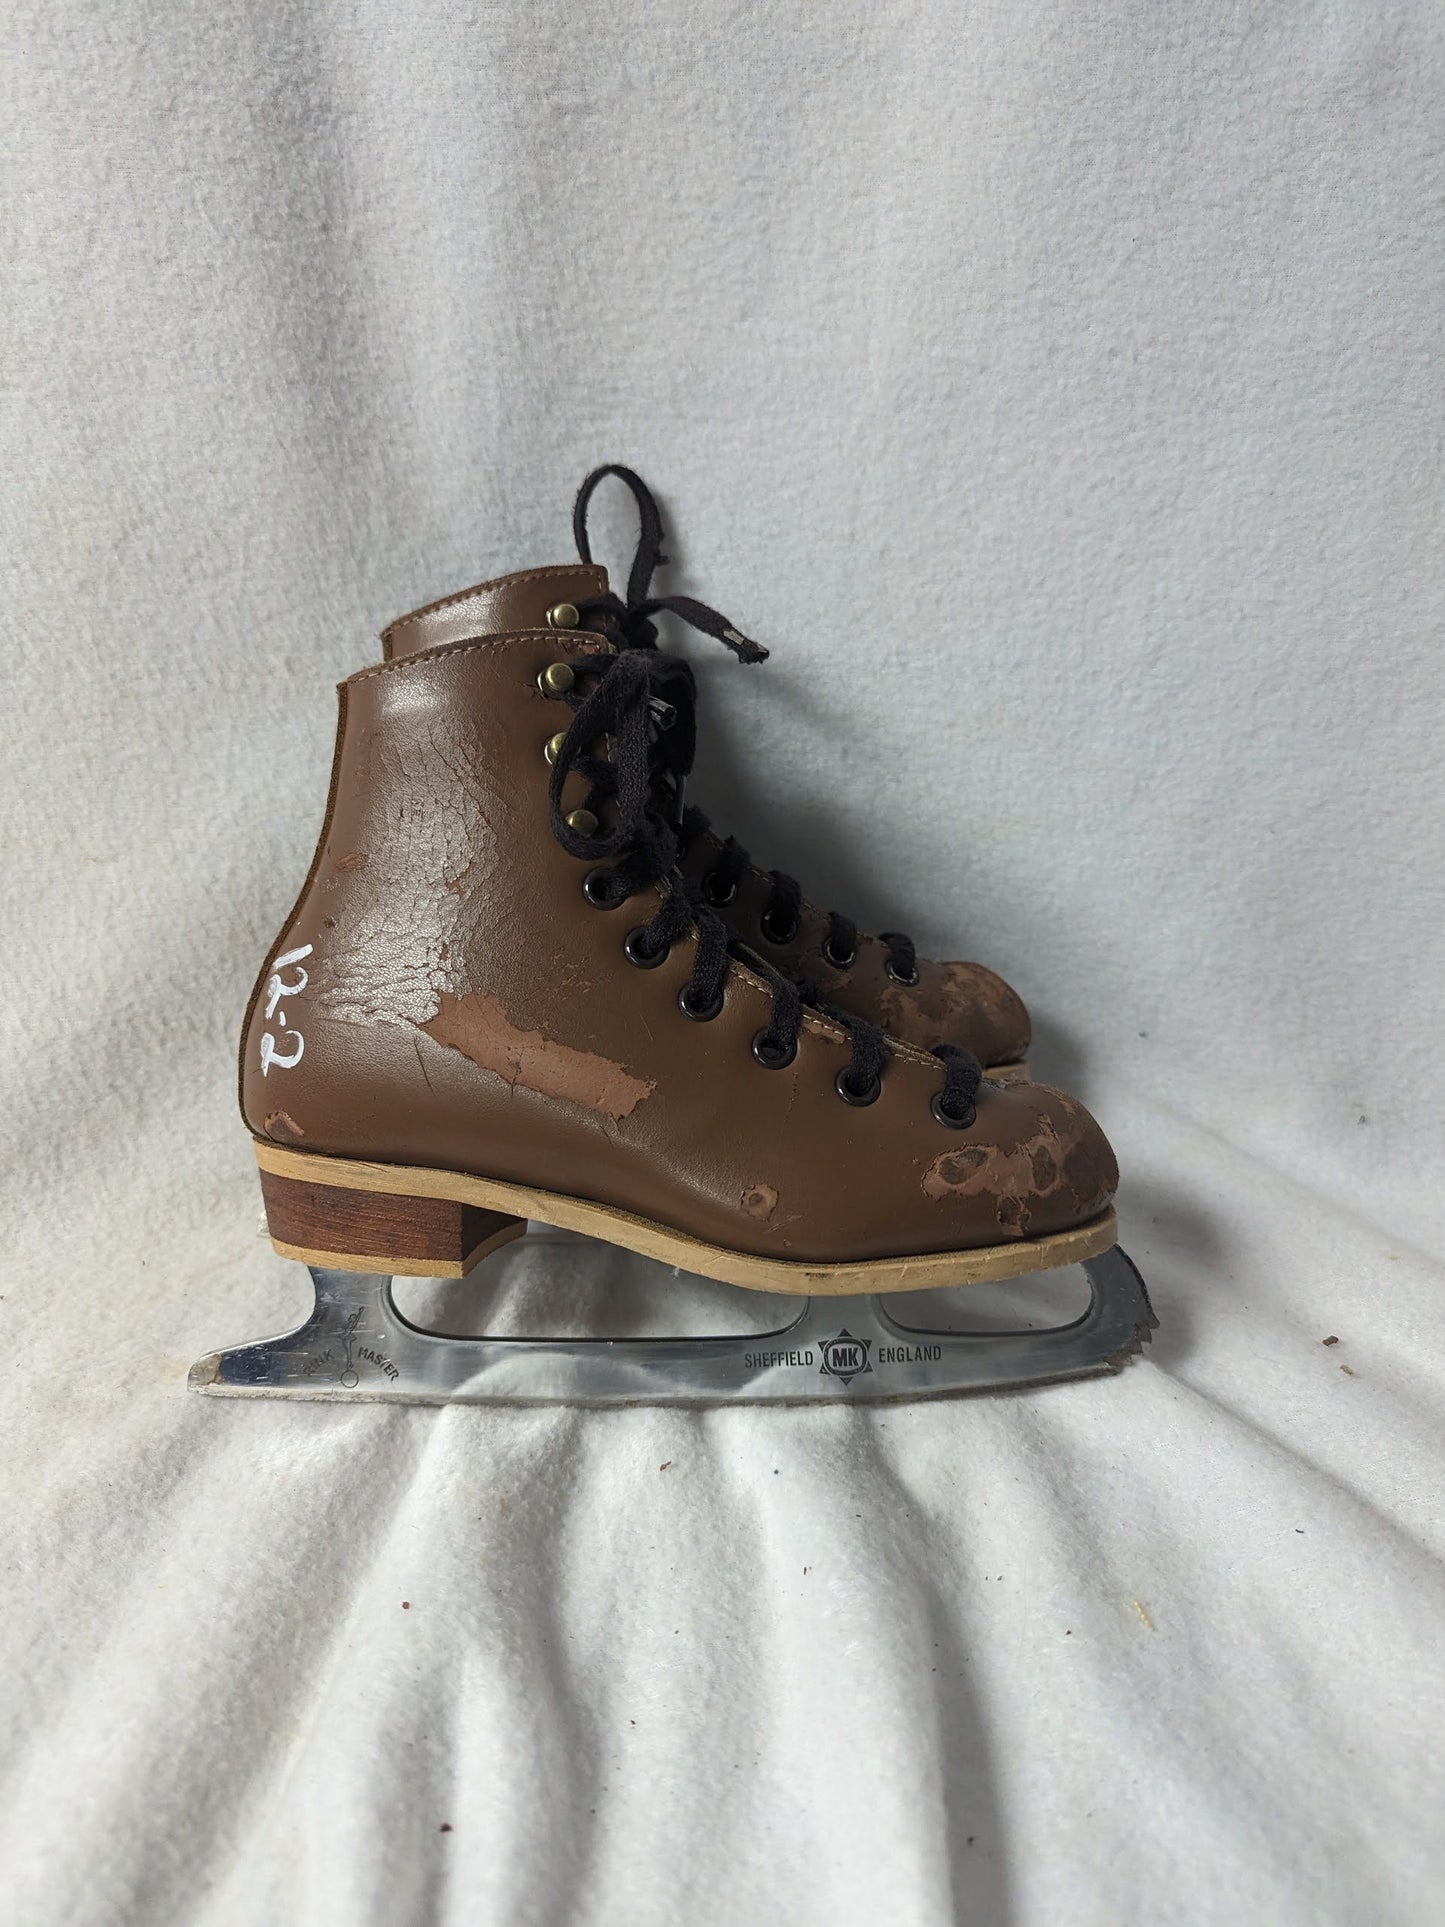 Rink Master Ice Skates Size Youth 12 Color Brown Condition Used